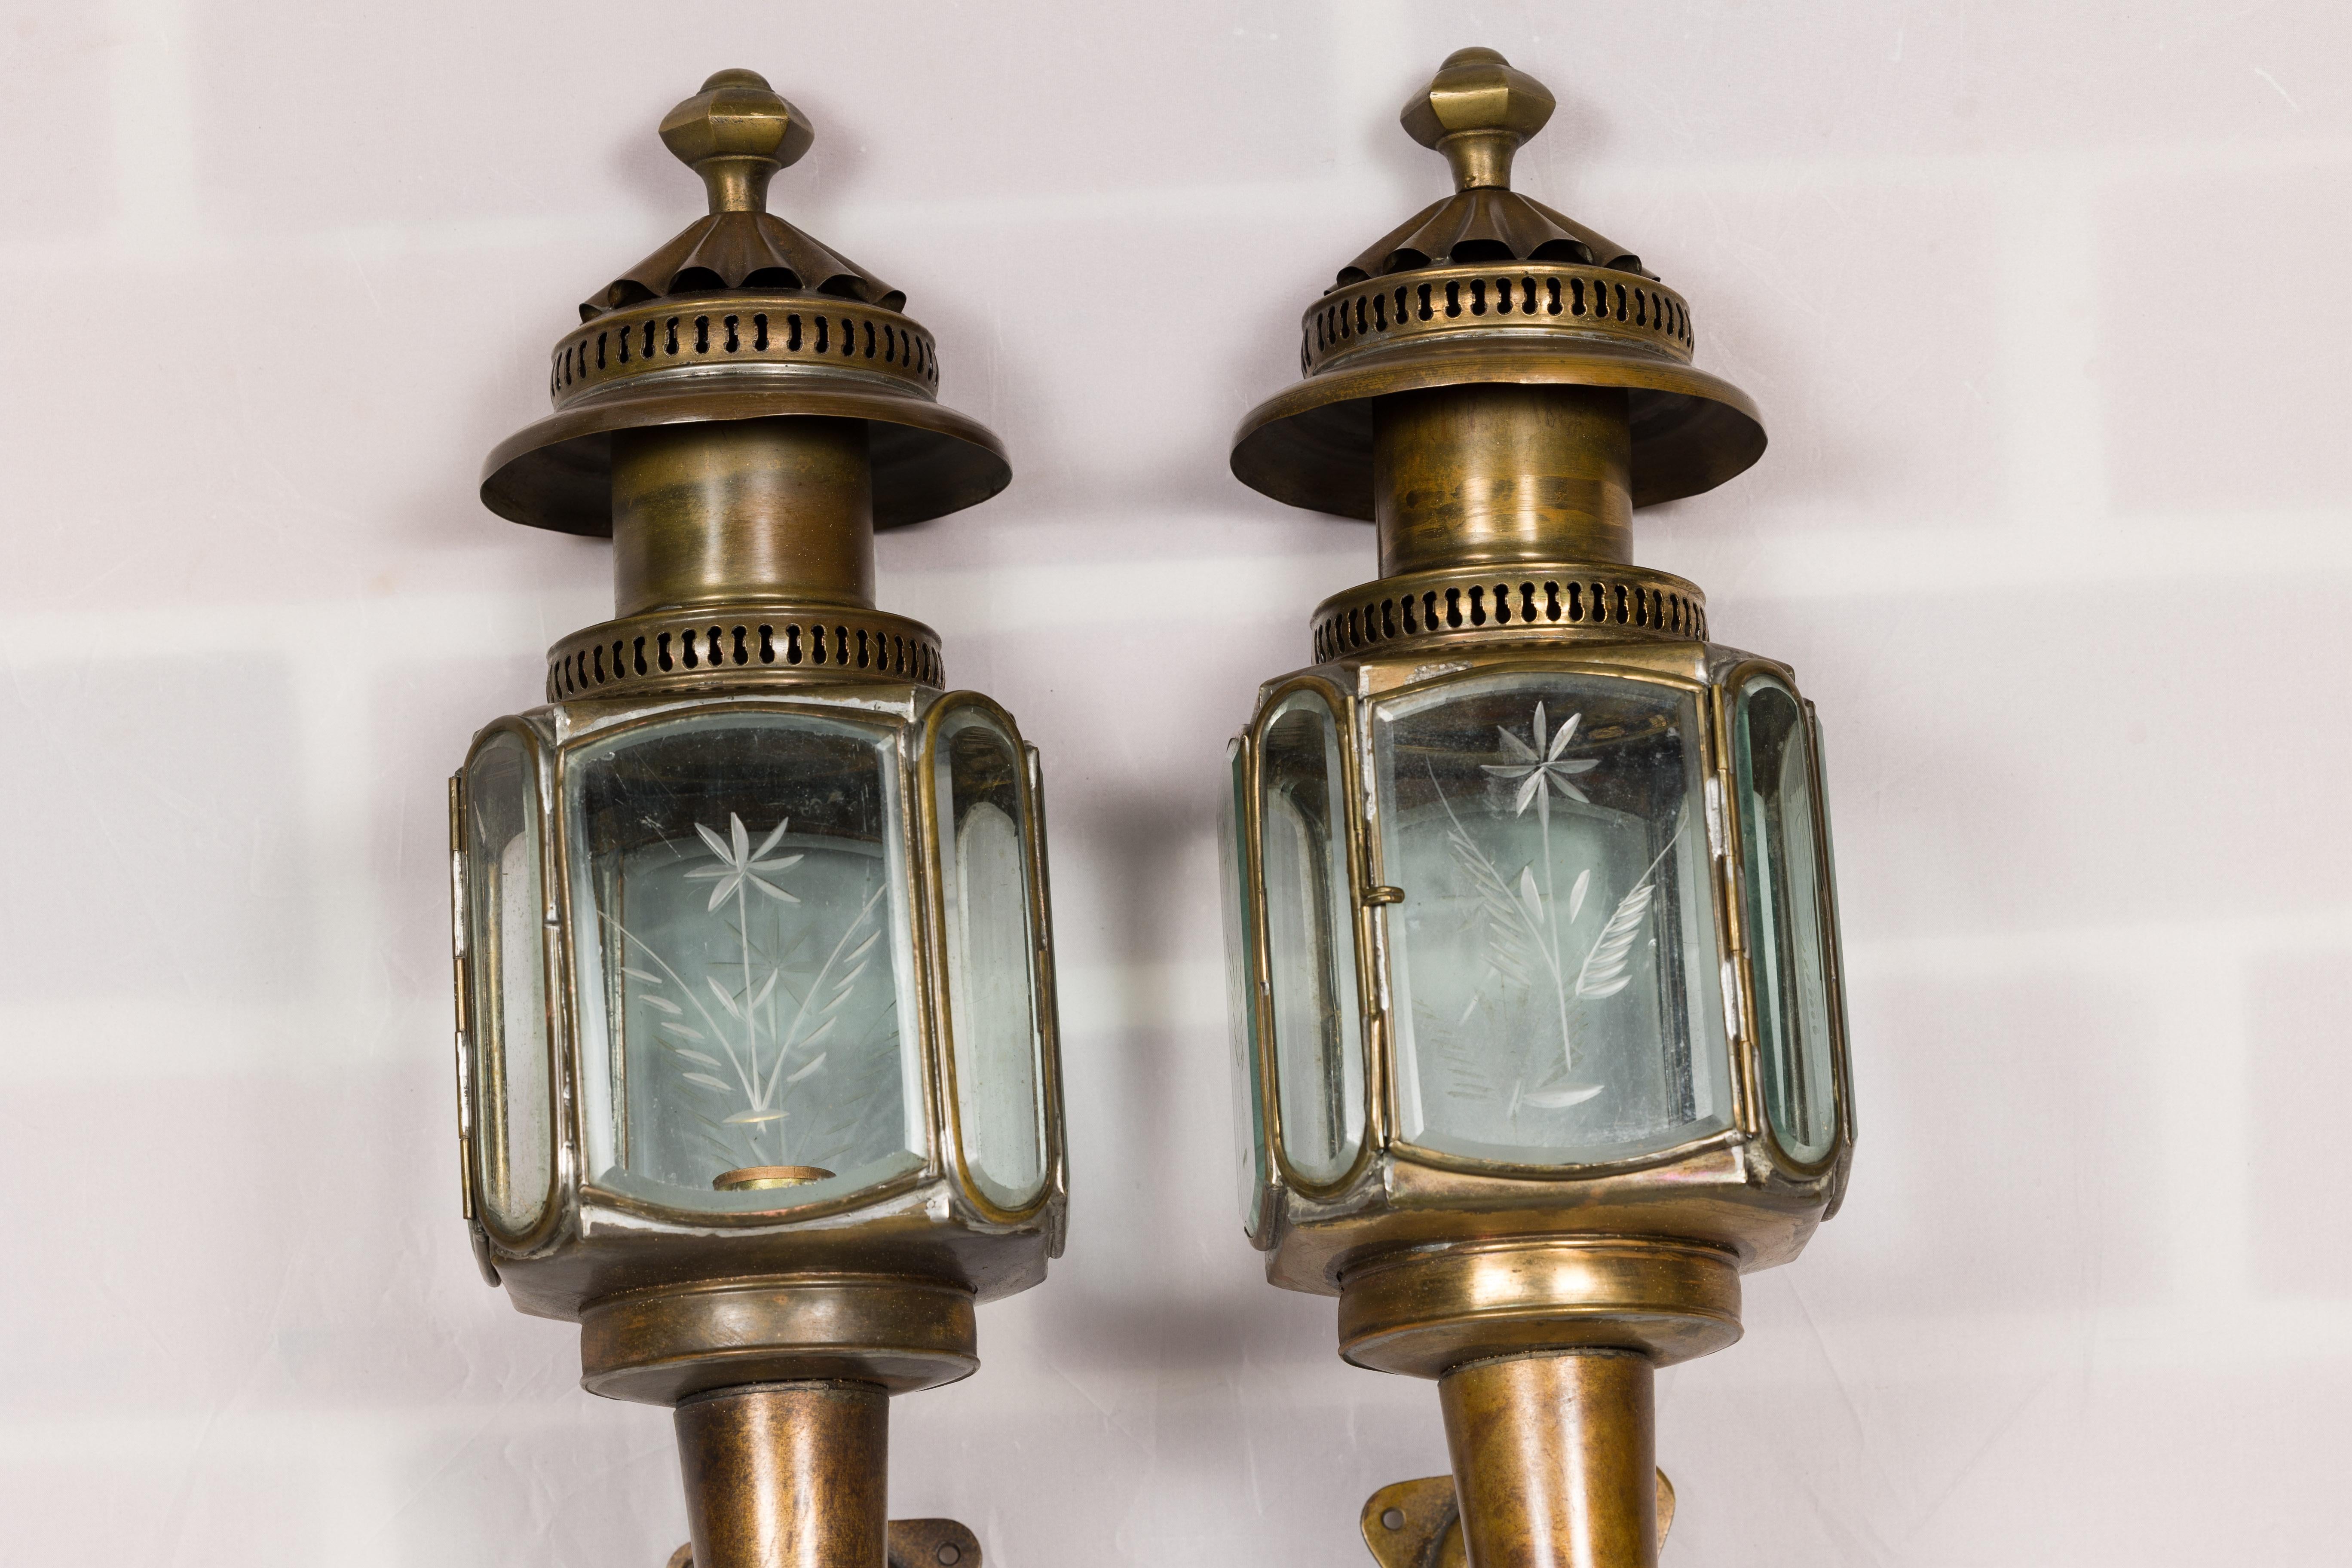 Pair of American Turn of the Century Wall Lanterns with Etched Glass, circa 1900 For Sale 2